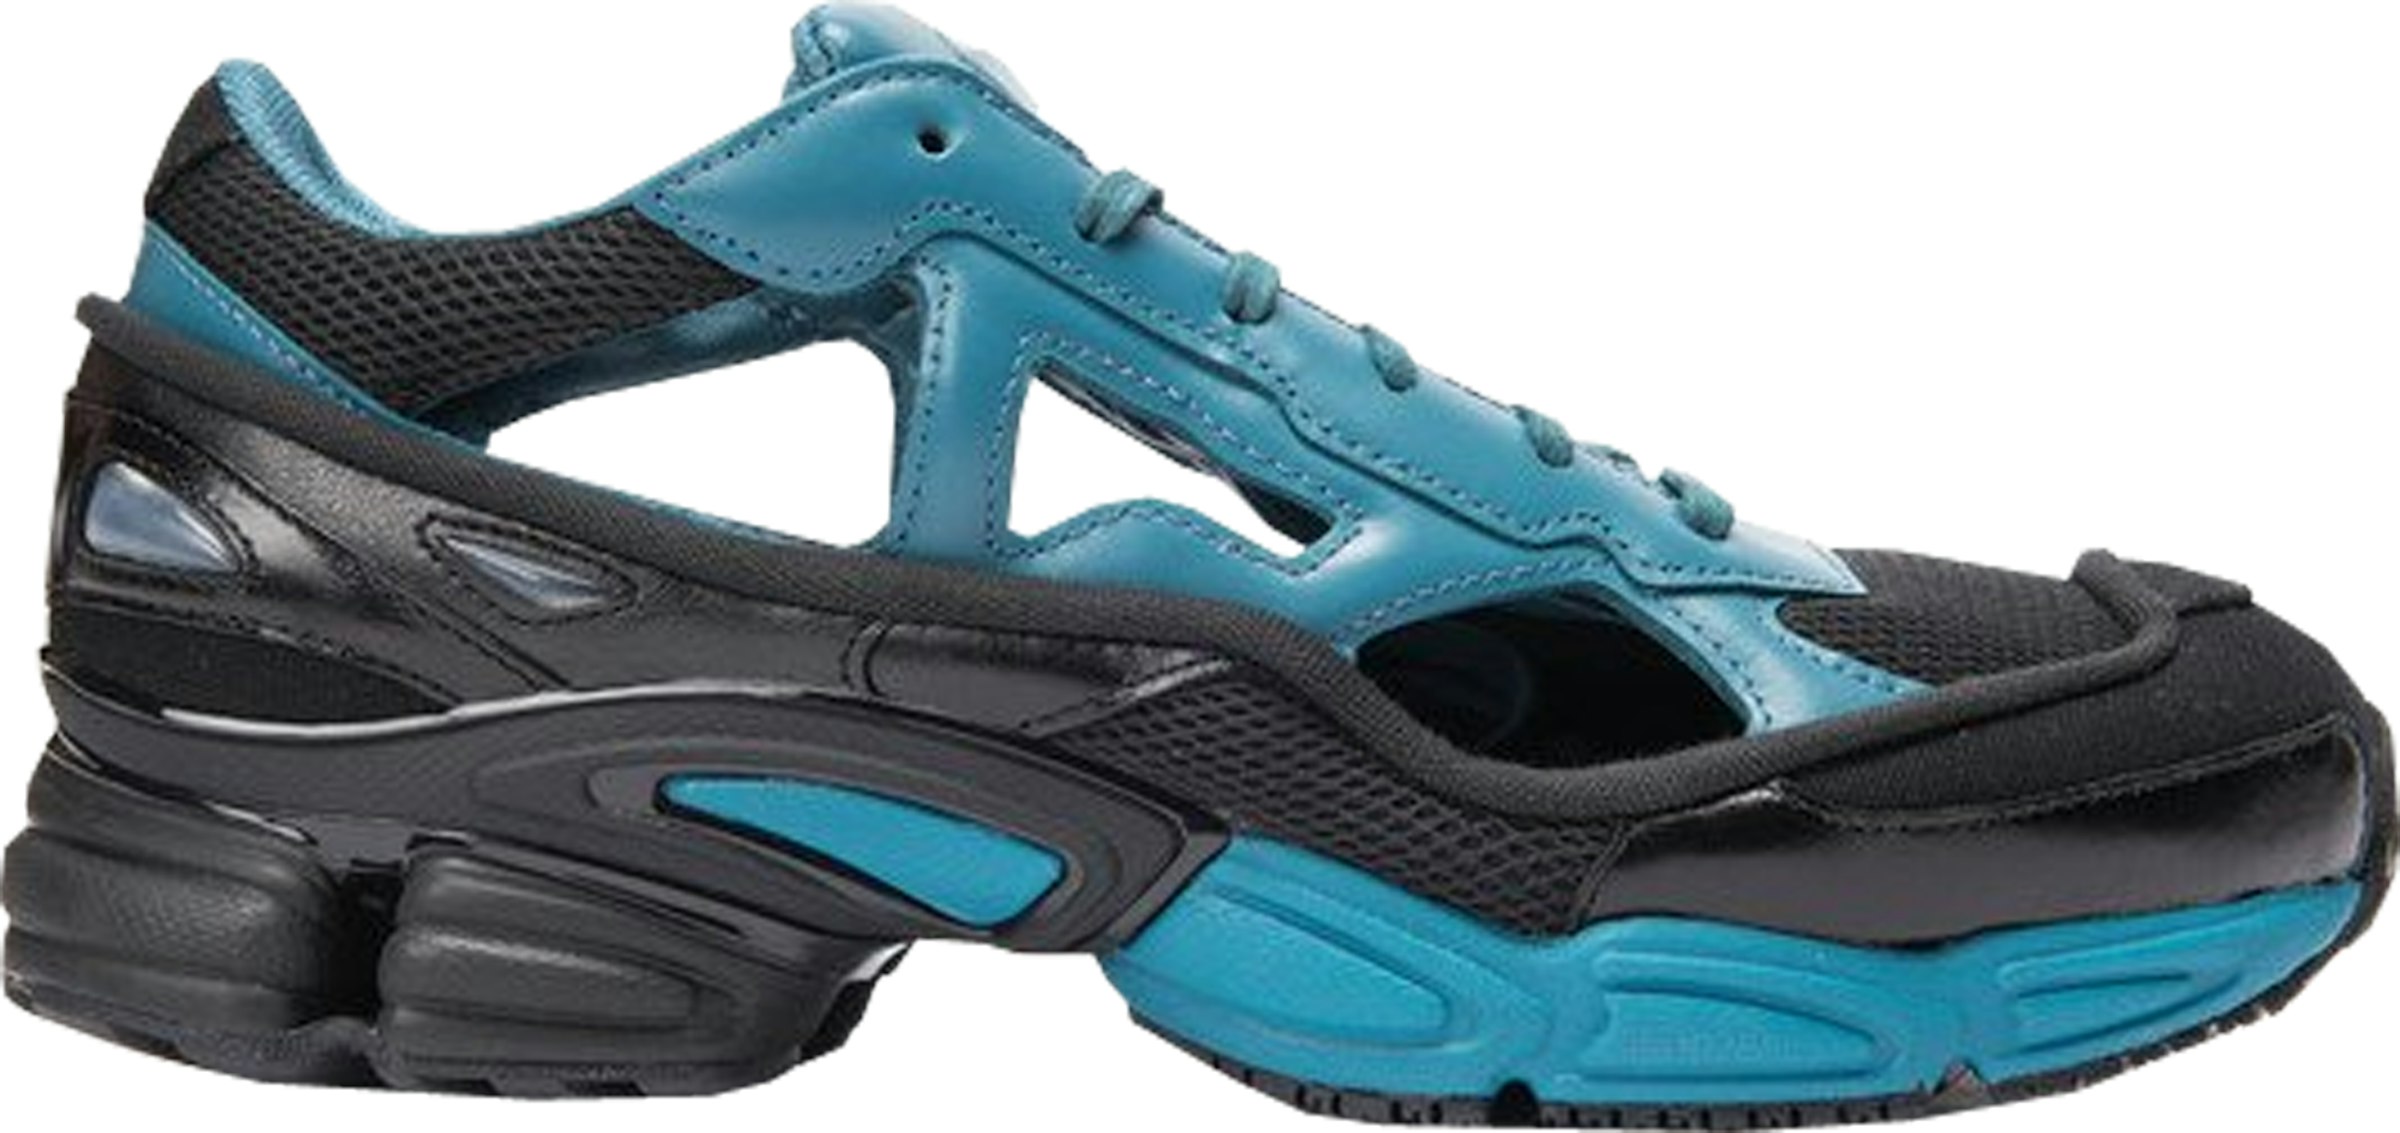 adidas RS Replicant Ozweego Raf Simons Colonial Blue (Special Edition with Socks) Men's - B27939 -